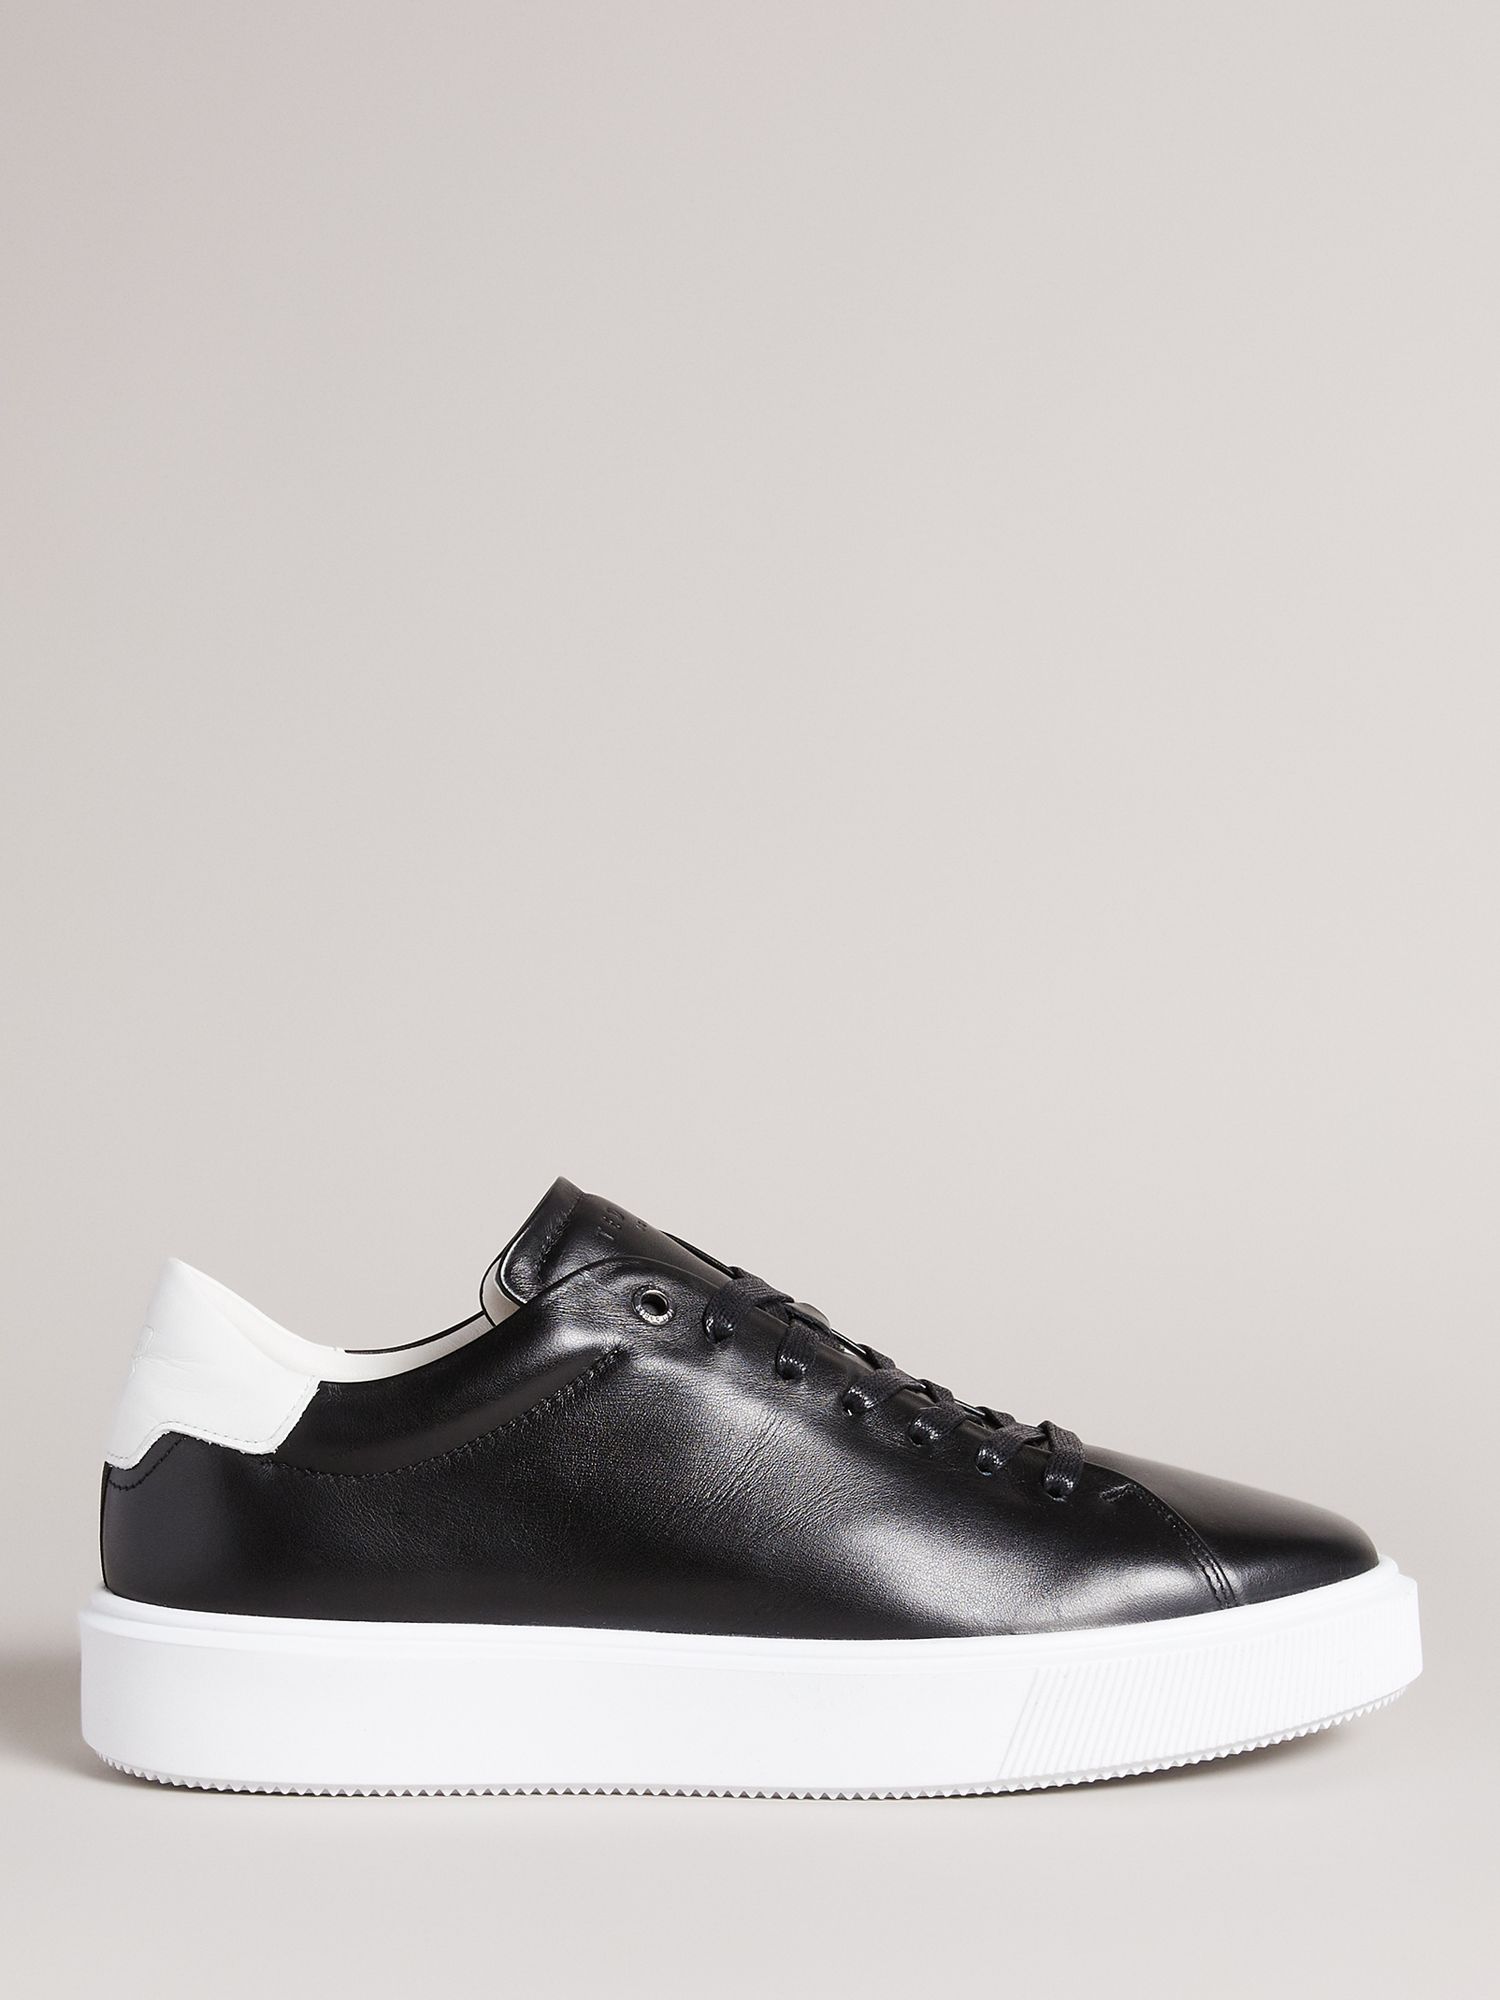 Ted Baker Breyon Leather Trainers, Black at John Lewis & Partners